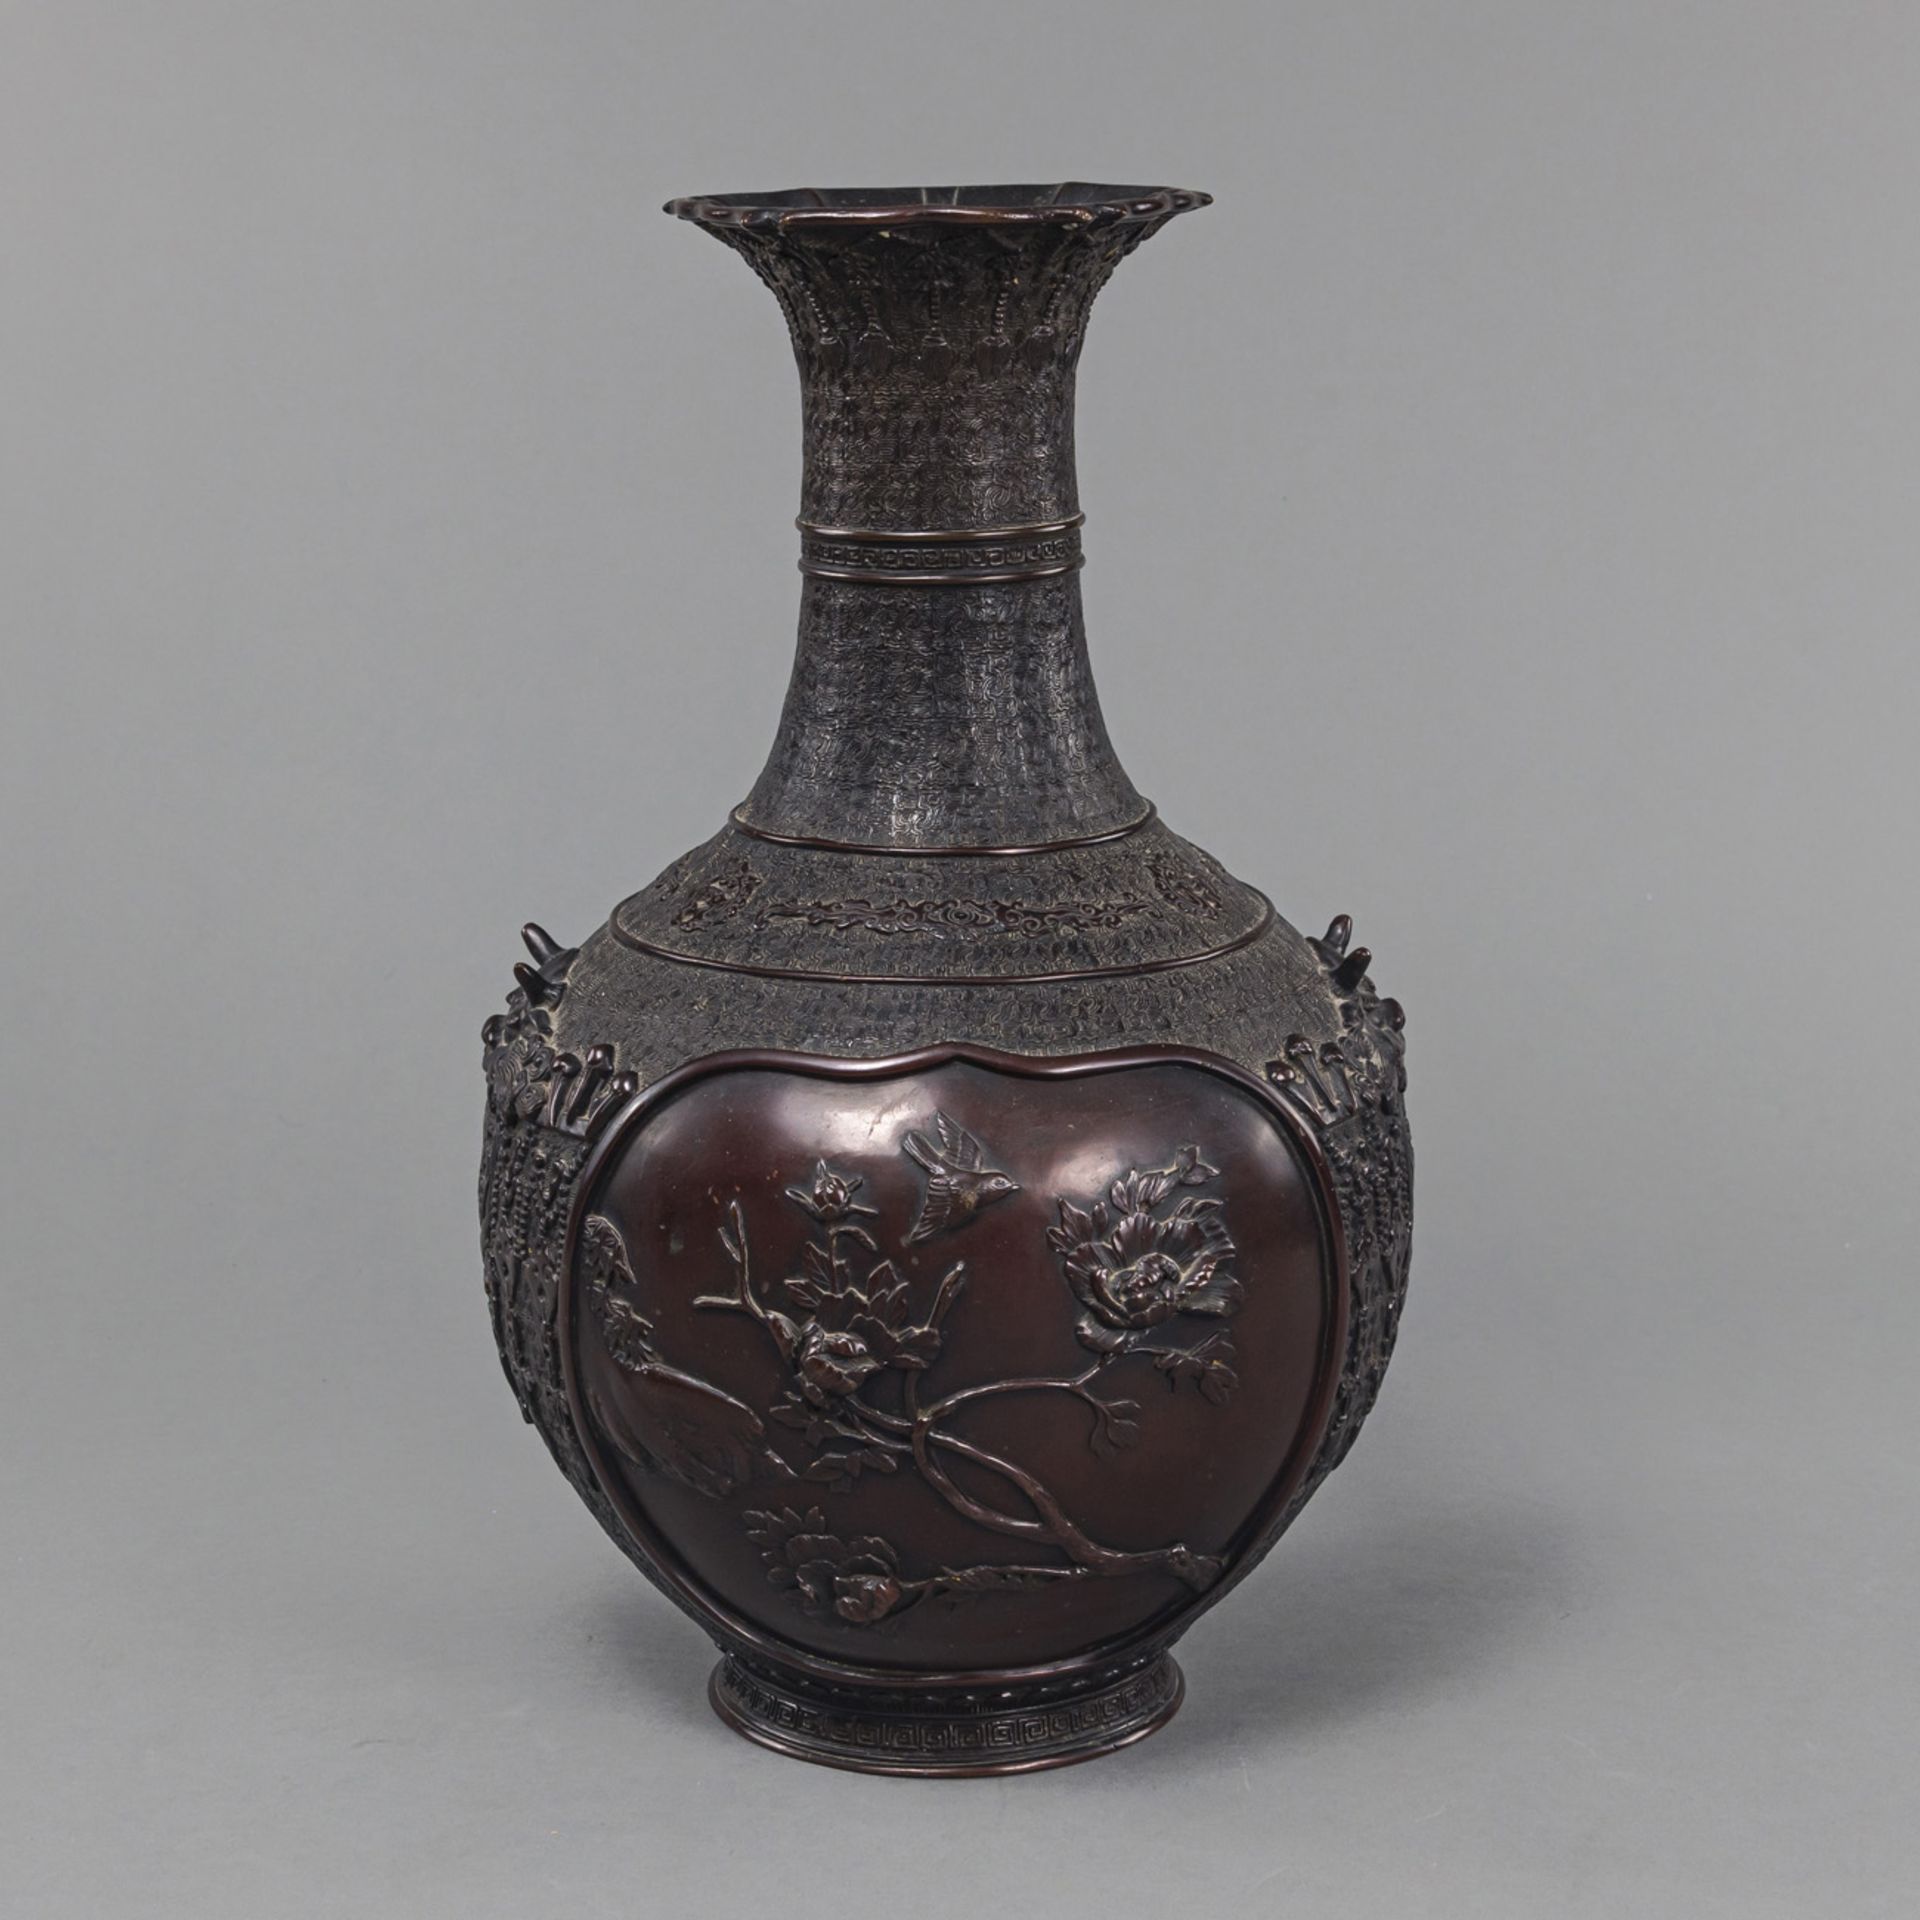 A FIGURES AND FLOWERS RELIEF BRONZE VASE - Image 2 of 4